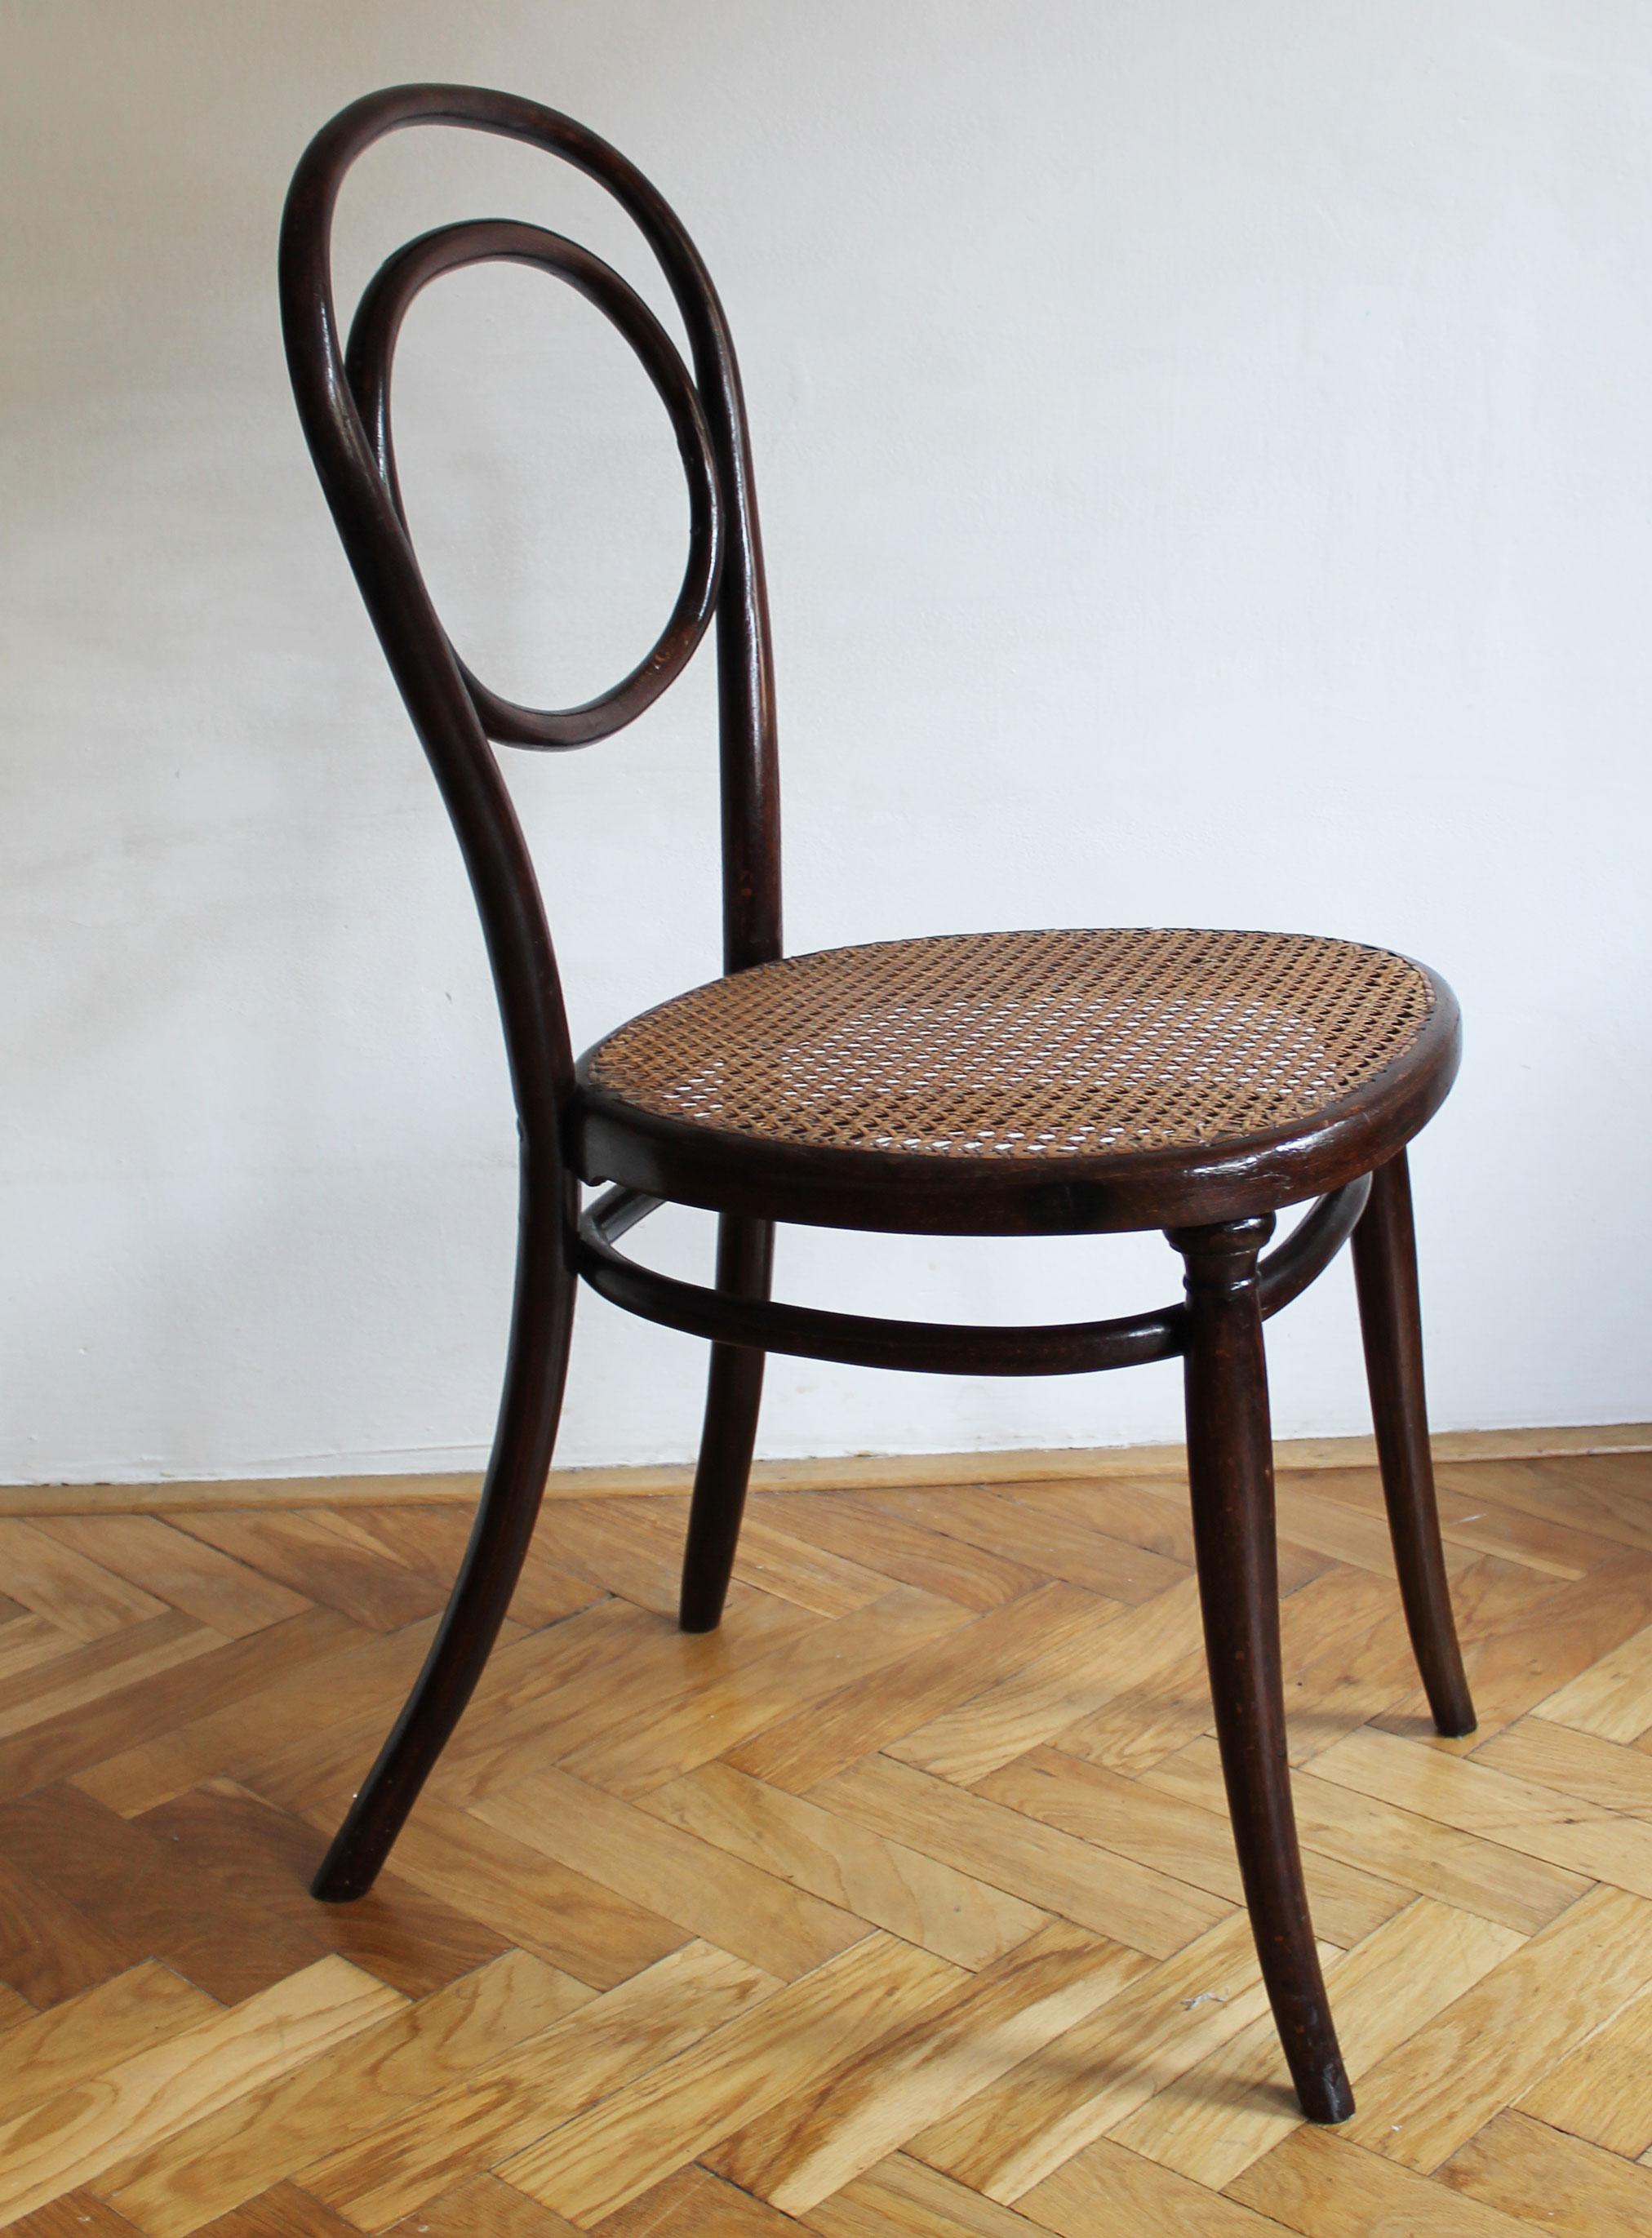 A rare bentwood dining chair with beautiful patterned wood and weaved rattan seat. This piece was designed and made by Gebrüder Thonet around 1850. We can find the chair in the old Thonet furniture catalogue as ‘Model Number 10’. This particular